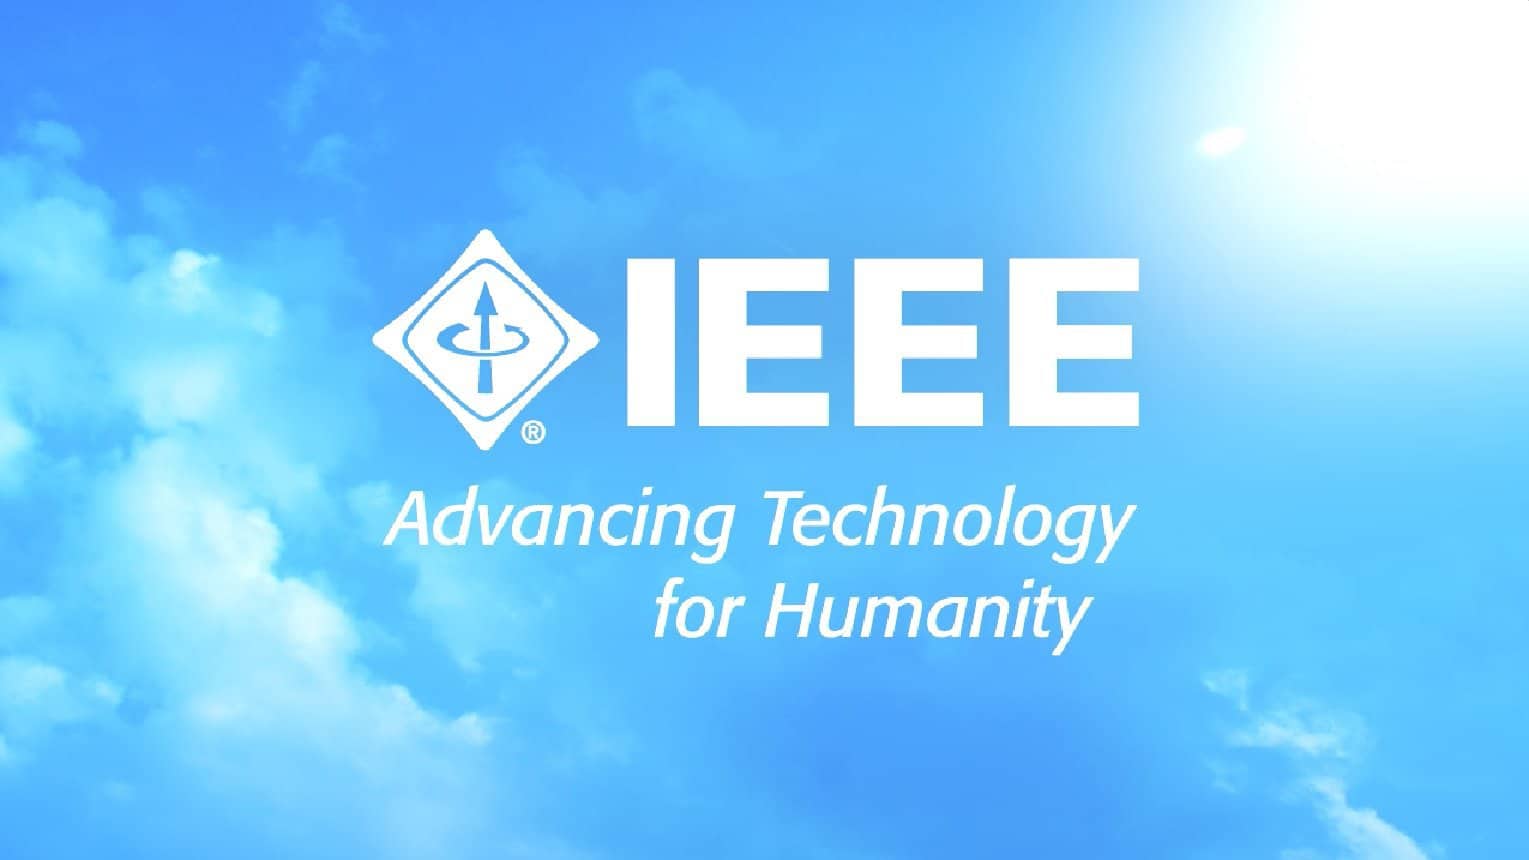 IEEE – Institute of Electrical and Electronics Engineers